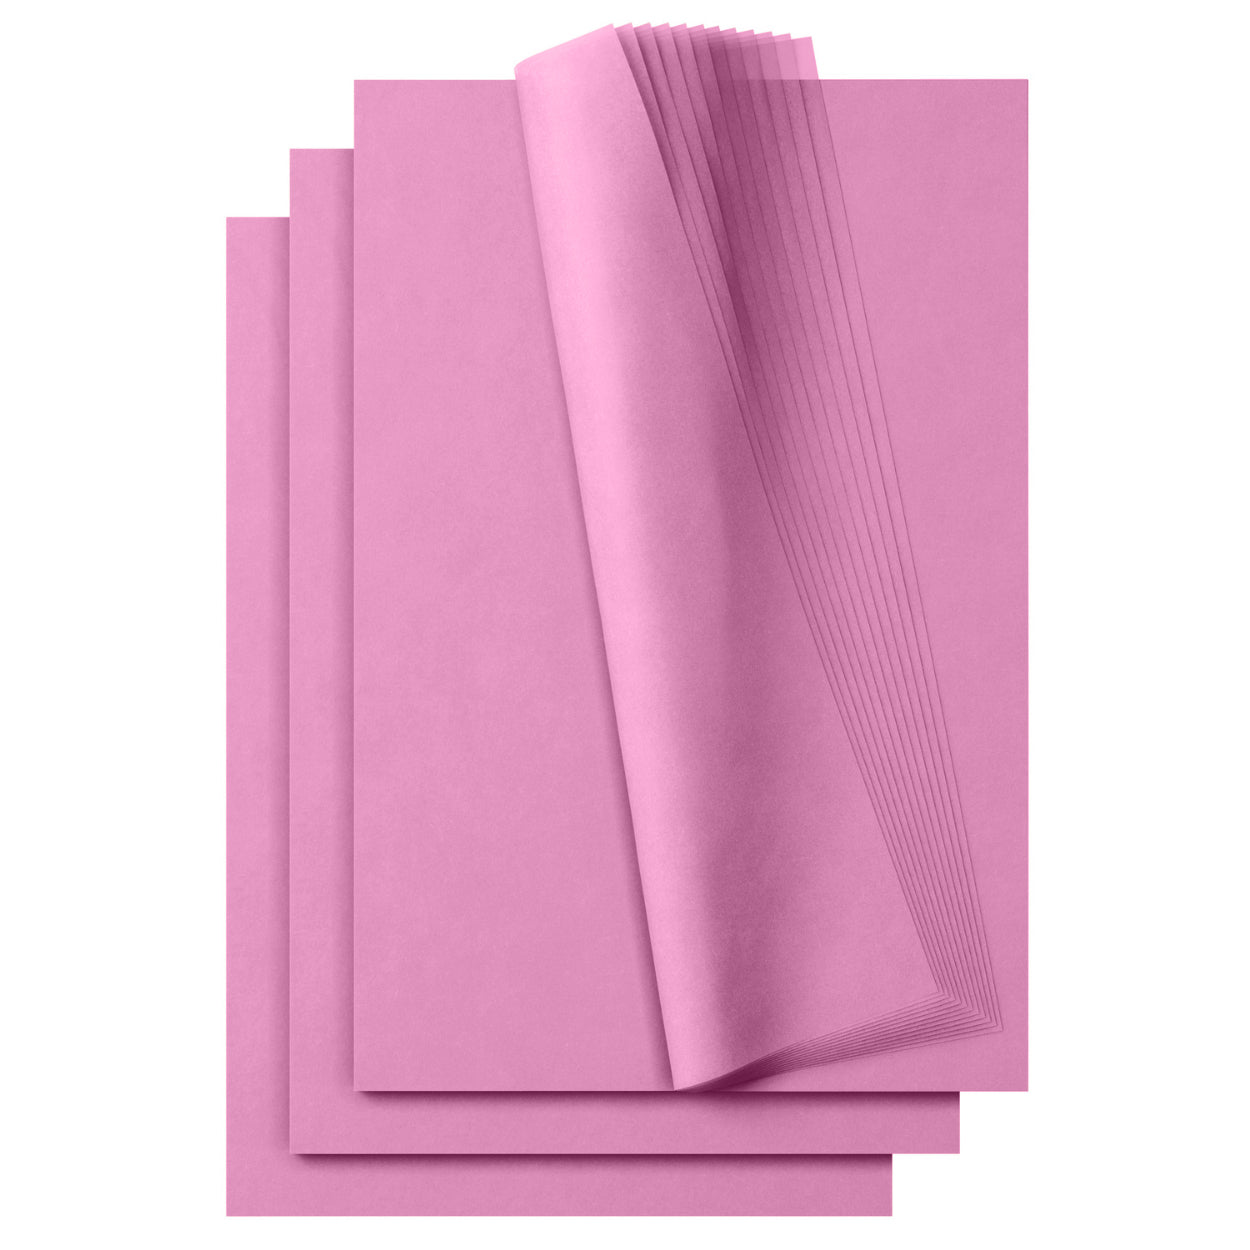 Tissue Paper Sheets - 20 x 30, Bright Pink